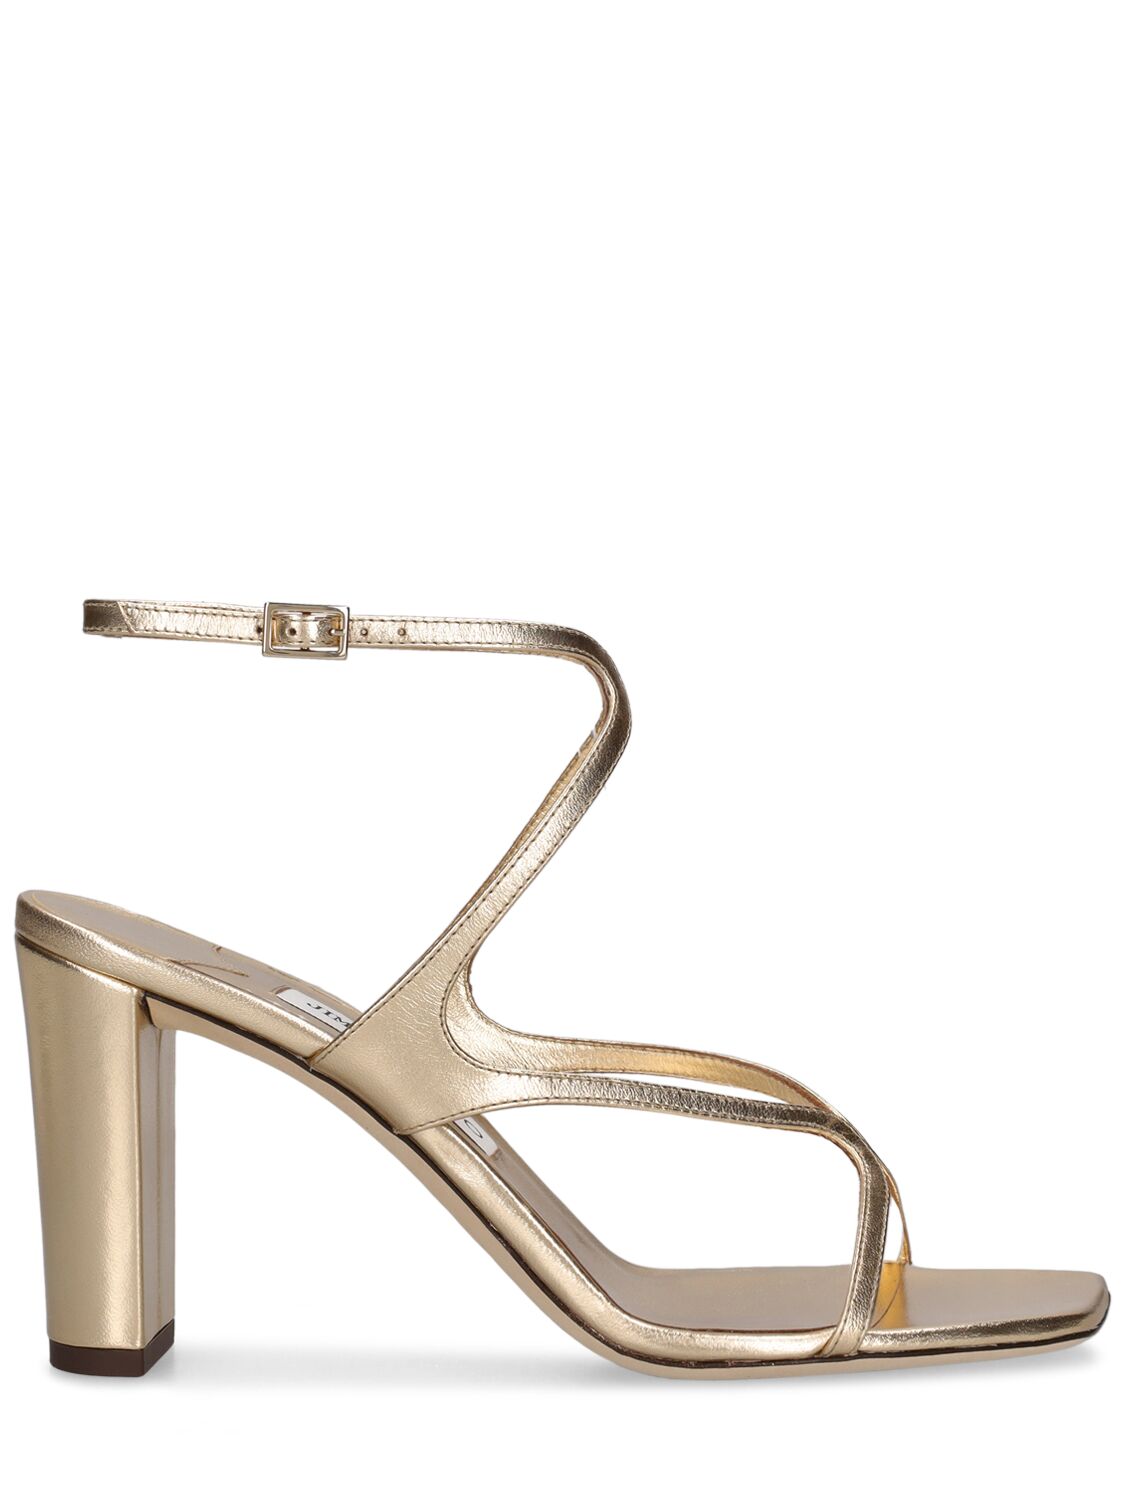 Jimmy Choo 85mm Azie Metallic Leather Sandals In Gold